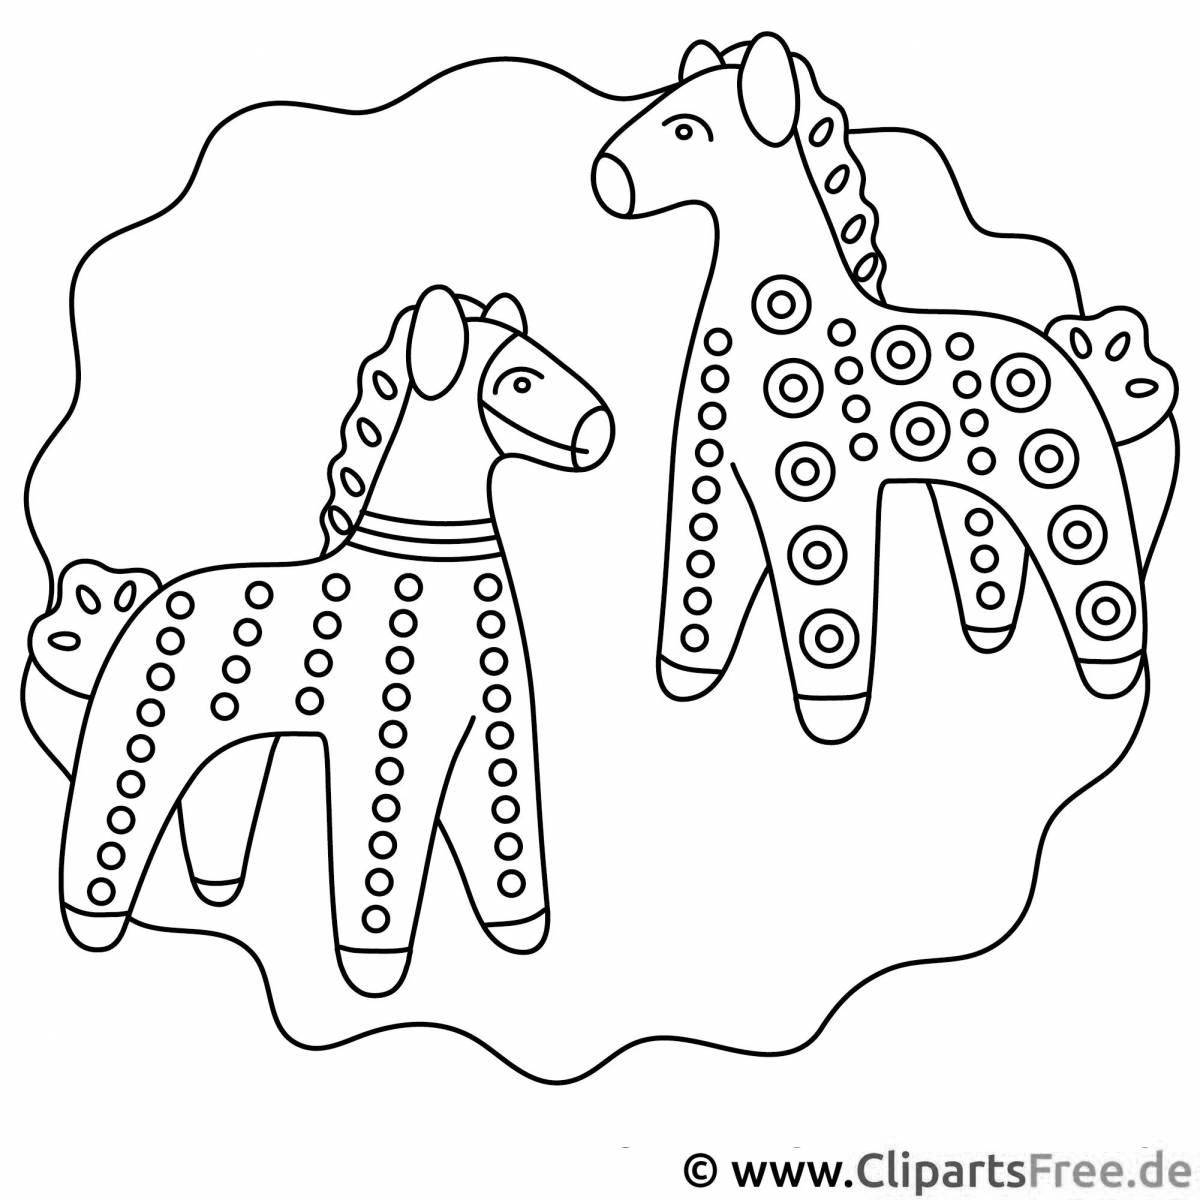 A fascinating Dymkovo horse coloring book for children